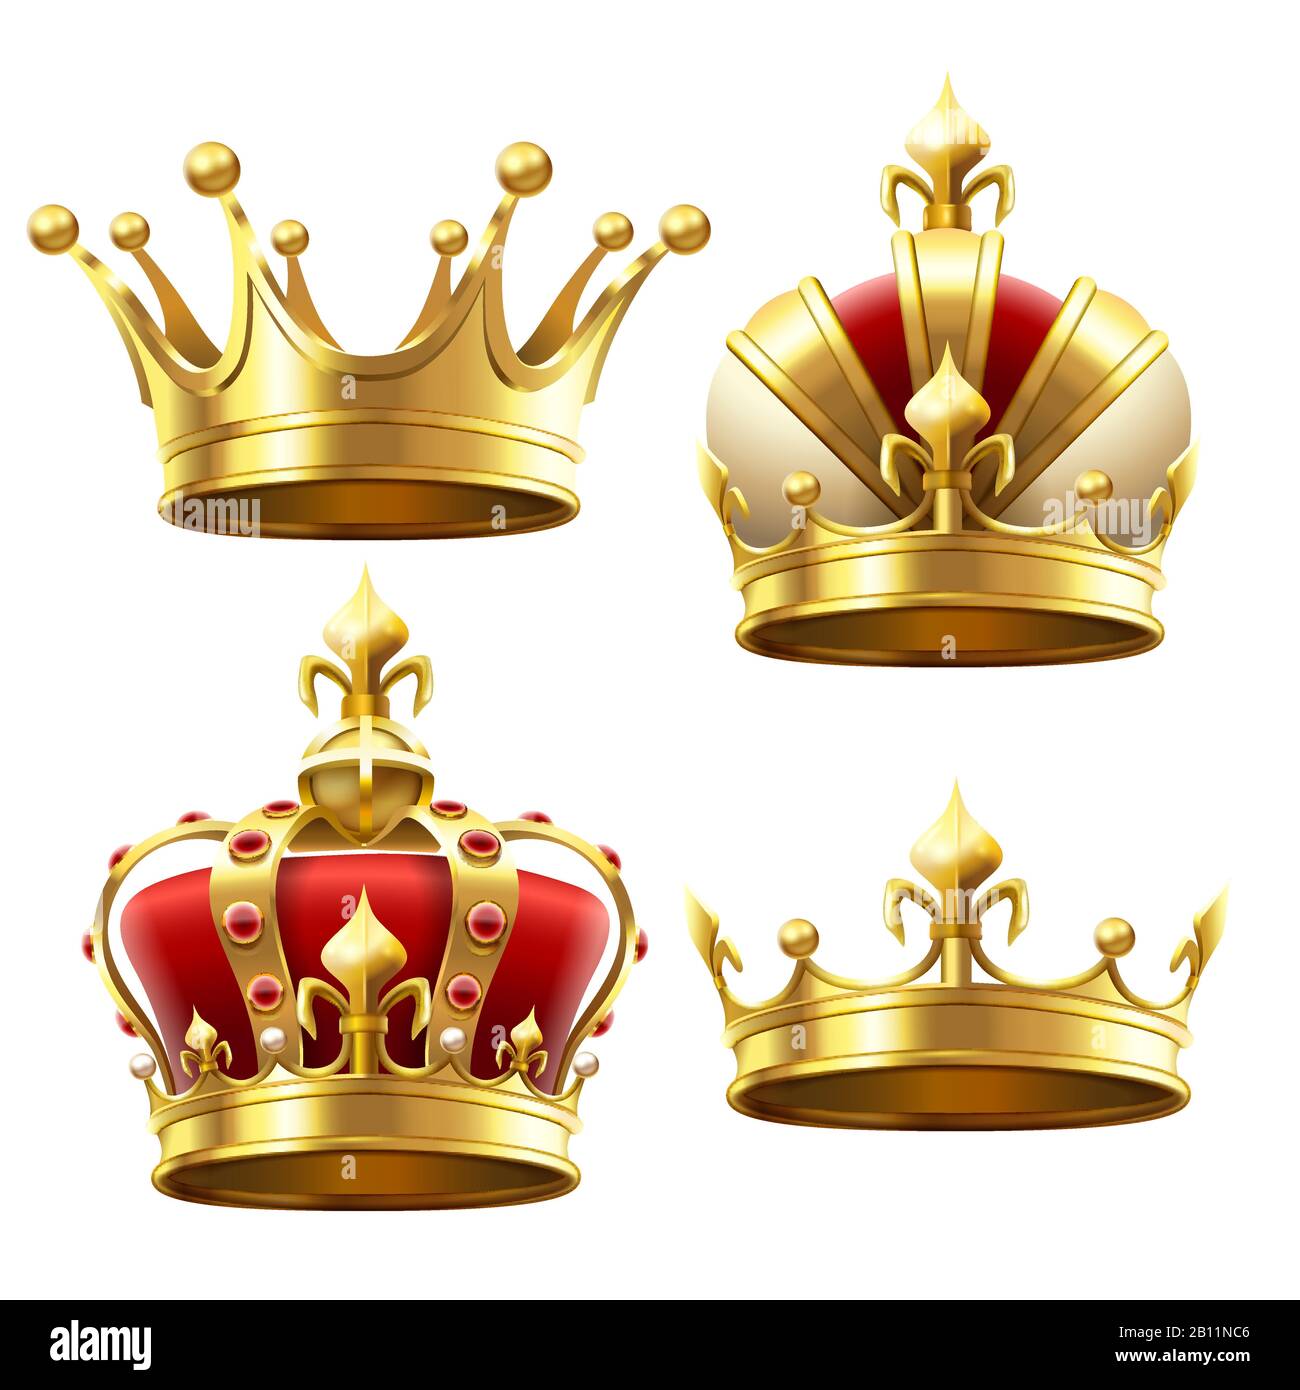 Realistic gold crown. Crowning headdress for king and queen. Royal crowns vector set Stock Vector